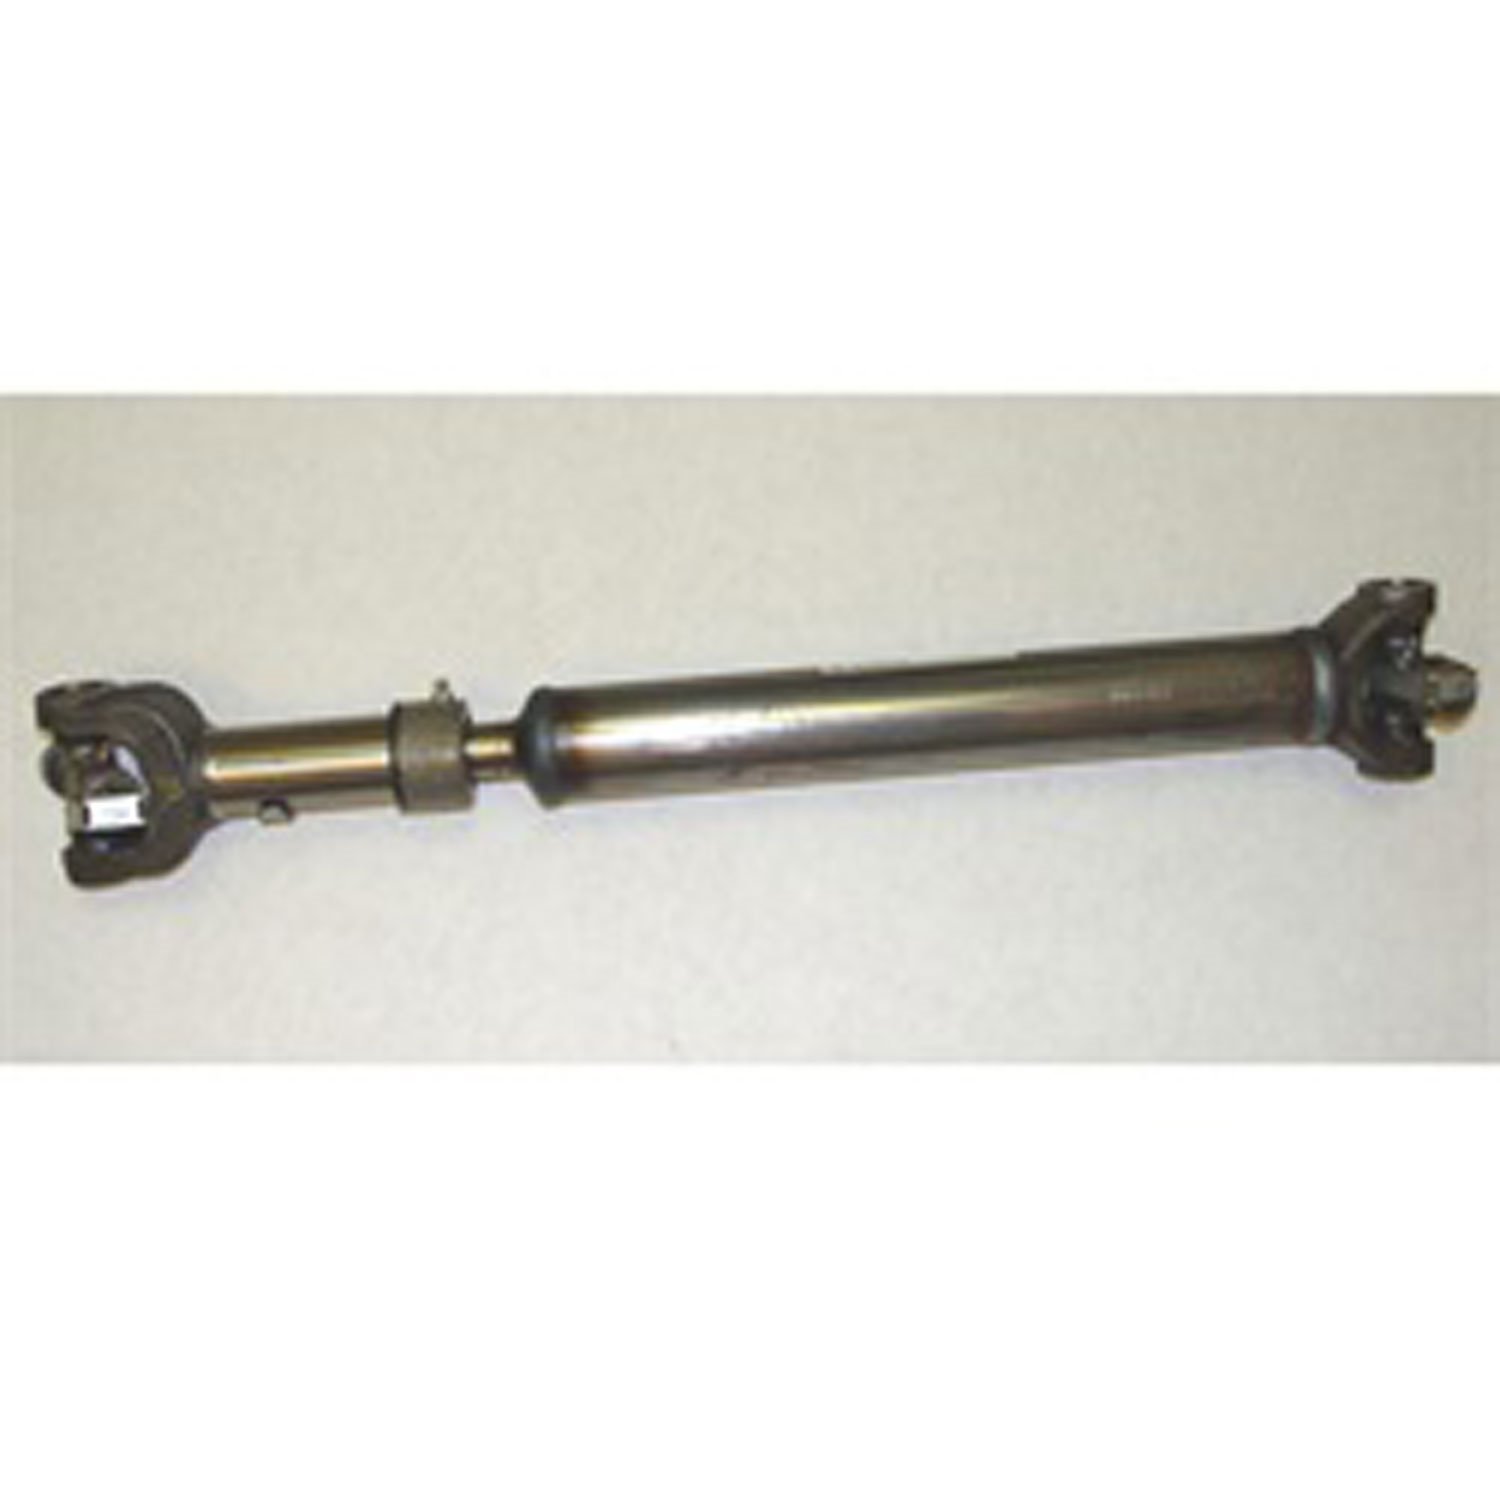 Stock replacement rear driveshaft from Omix-ADA, Fits 81-86 Jeep CJ7 with a T4 T5 or T170 manual transmission.